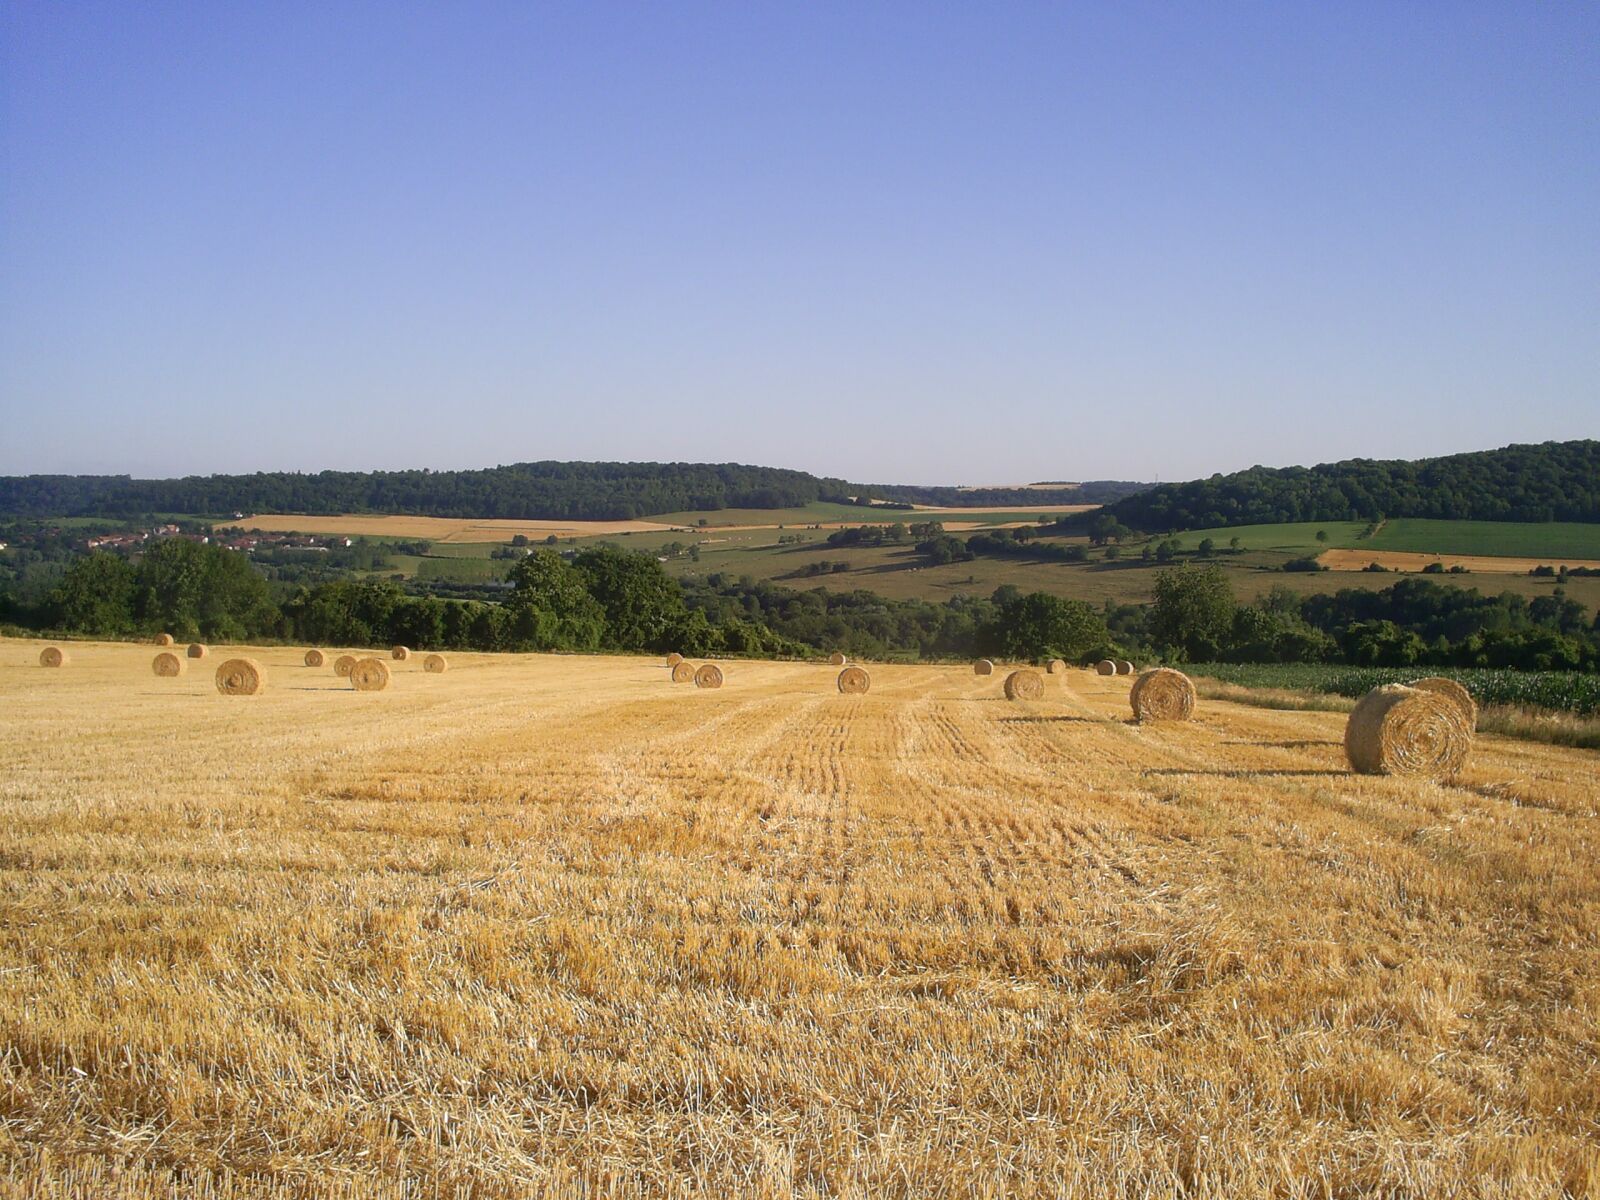 Samsung Digimax A502 sample photo. "Field, harvest, straw" photography